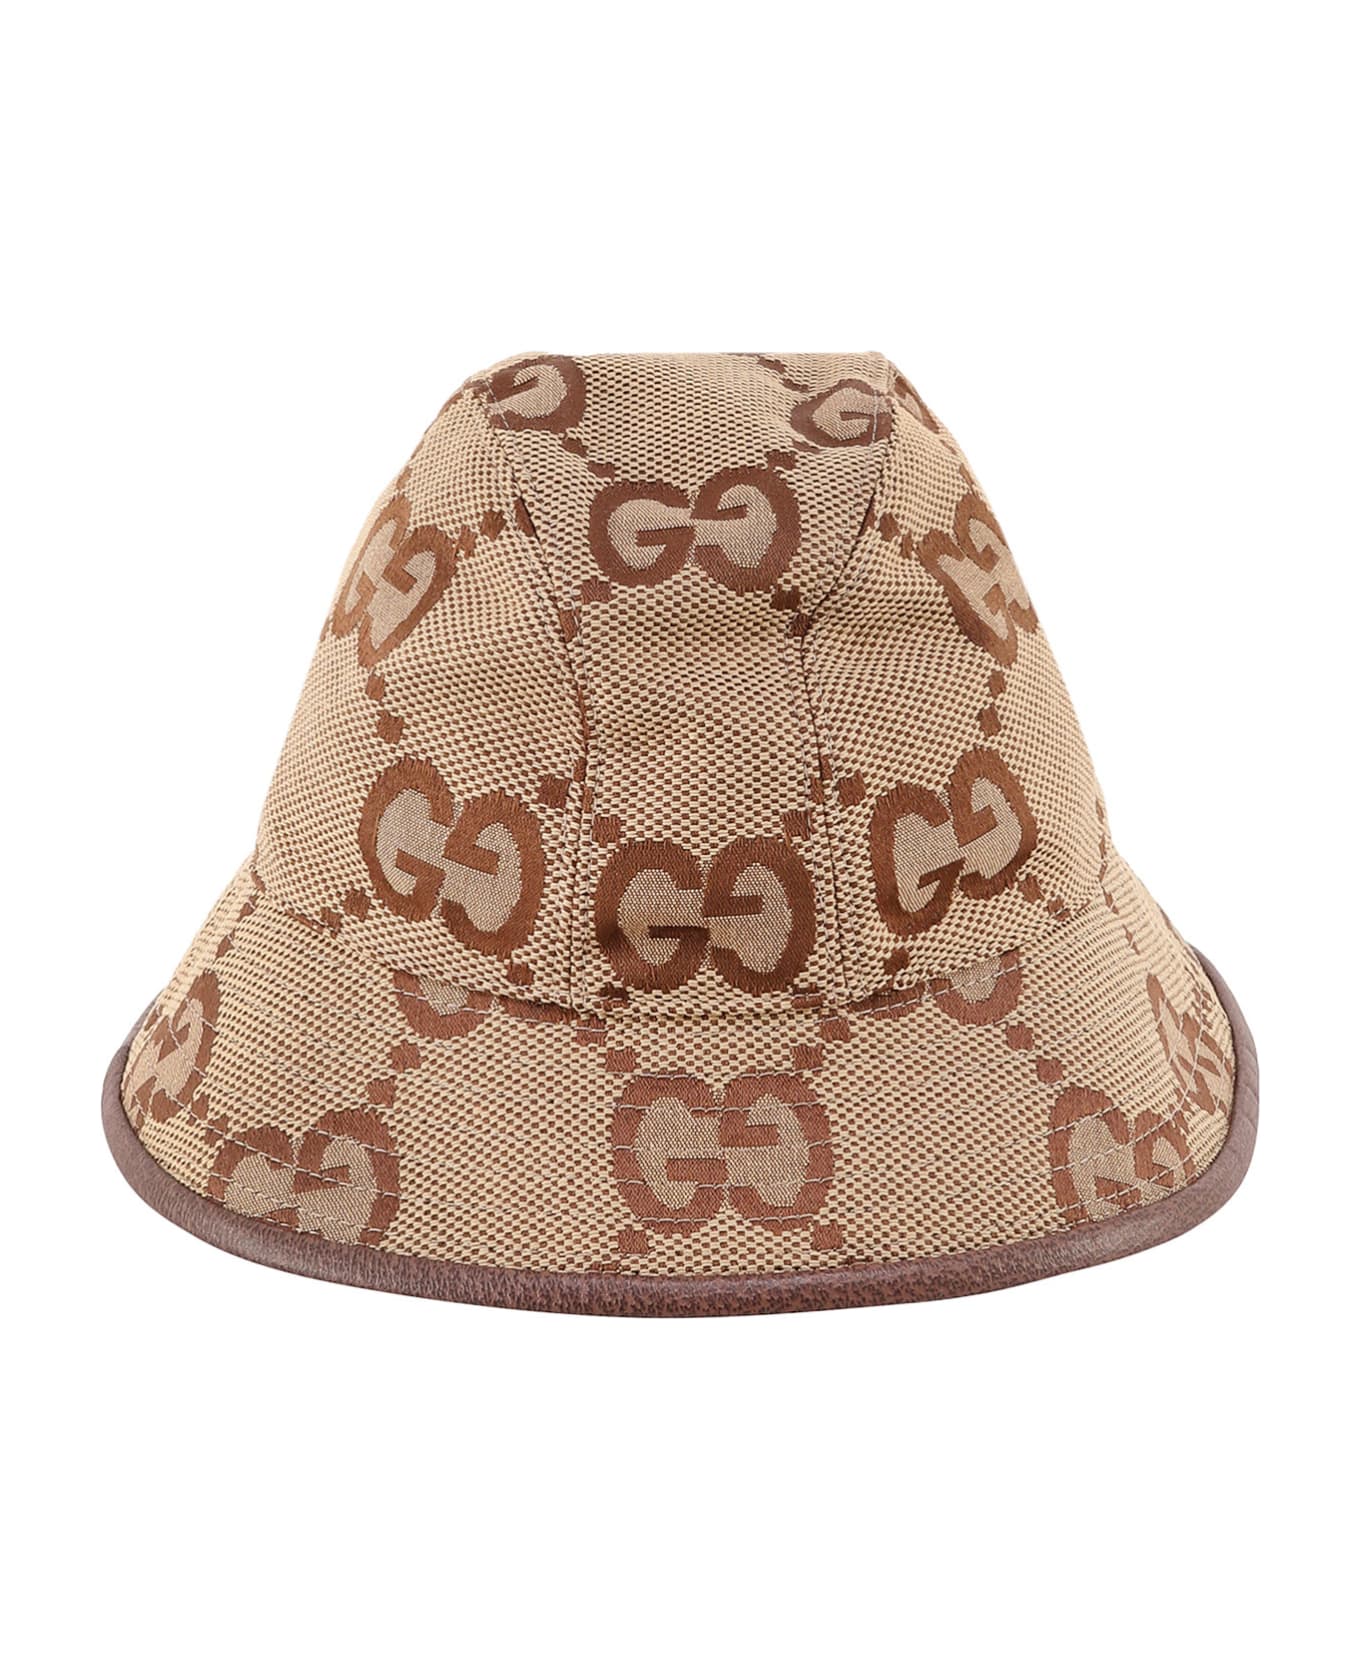 Gucci Embroidered Cotton Blend Hat - Brown